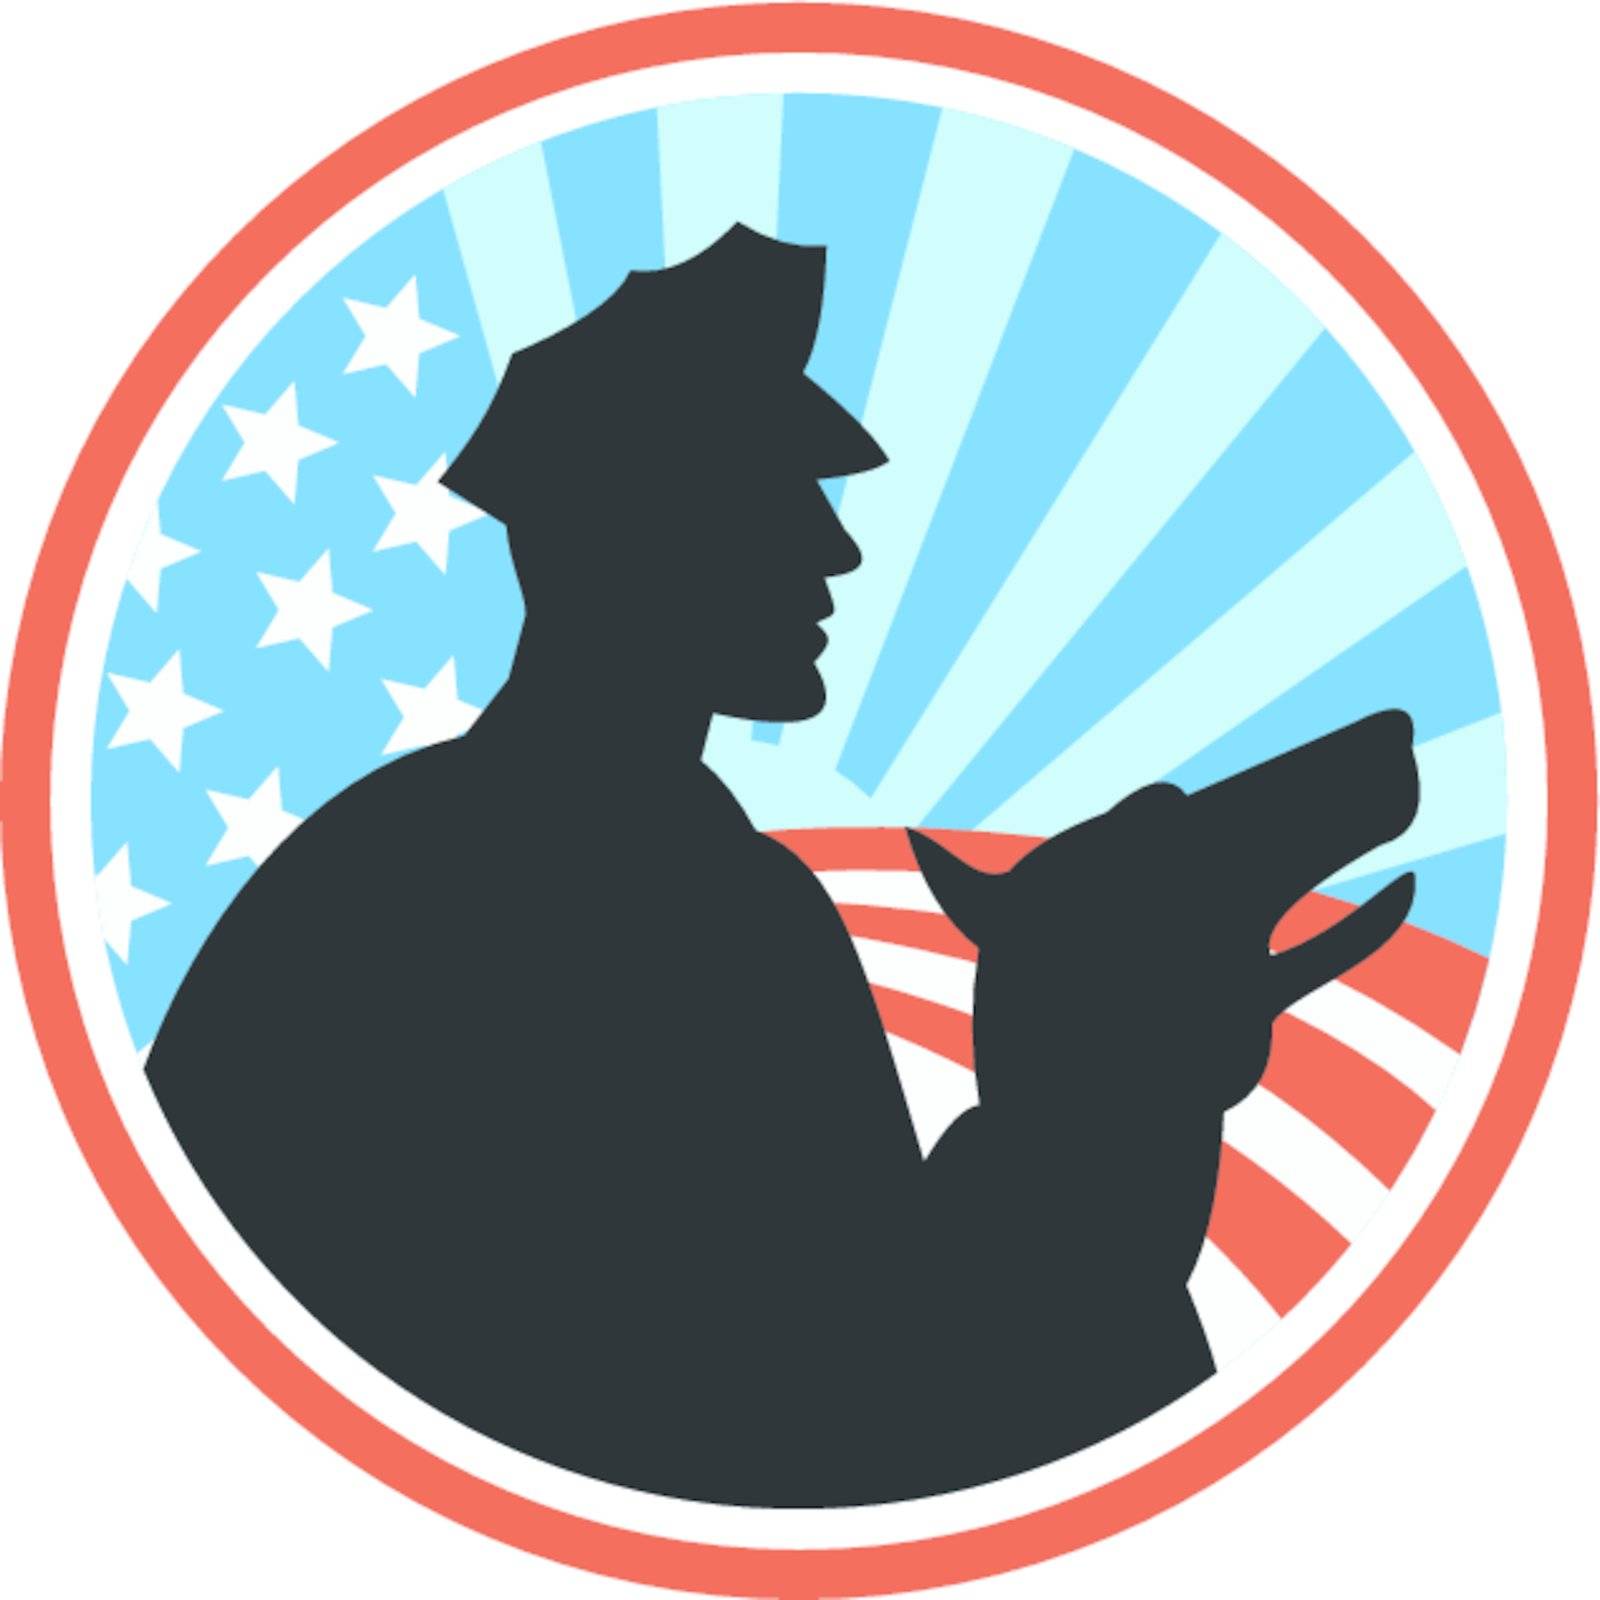 Illustration of a policeman security guard with police dog with American stars and stripes set inside circle done in retro style.